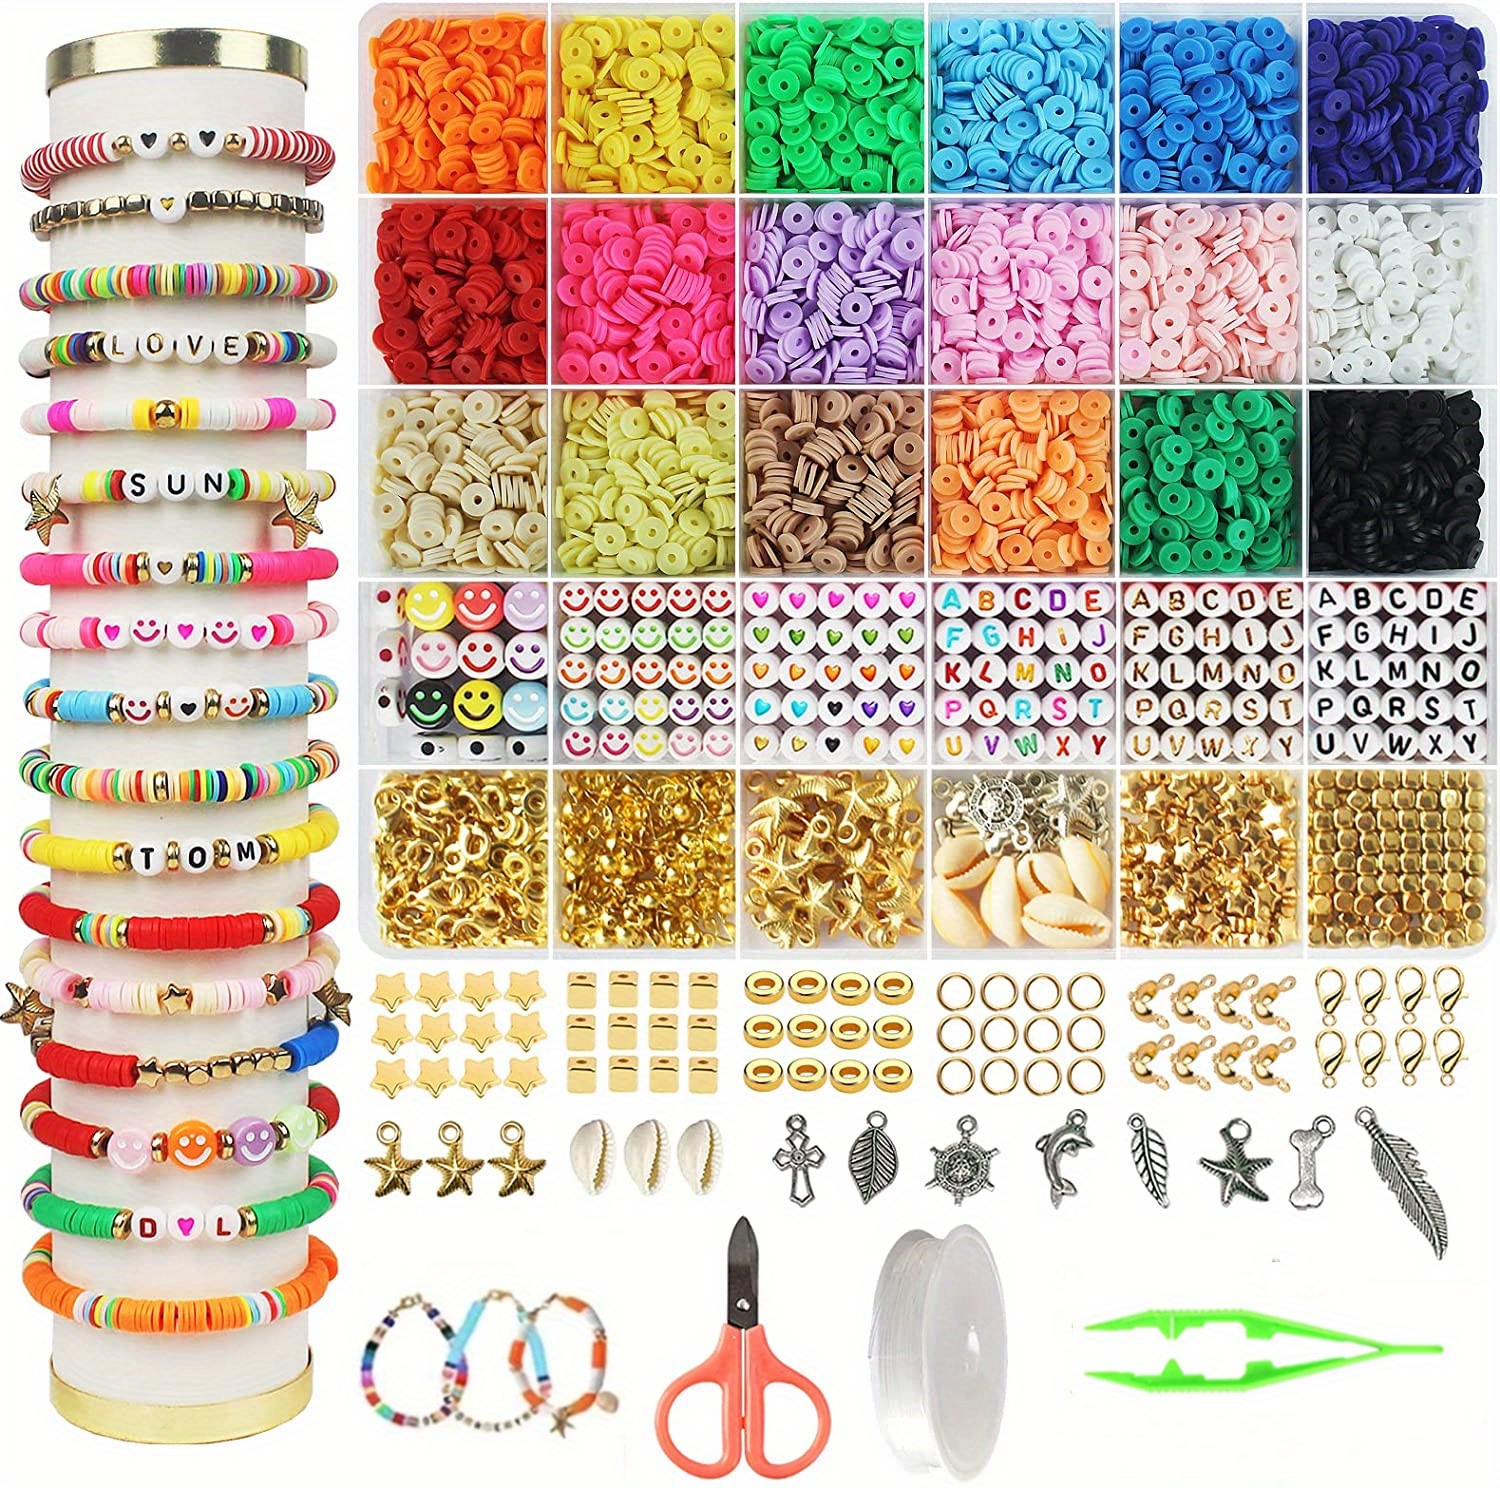 Gear Go Bead Bracelet Making Kit, Bead Friendship Bracelets Kit with Beads Letter Beads Charm Beads and Elastic String, Women's, Size: One size, Other